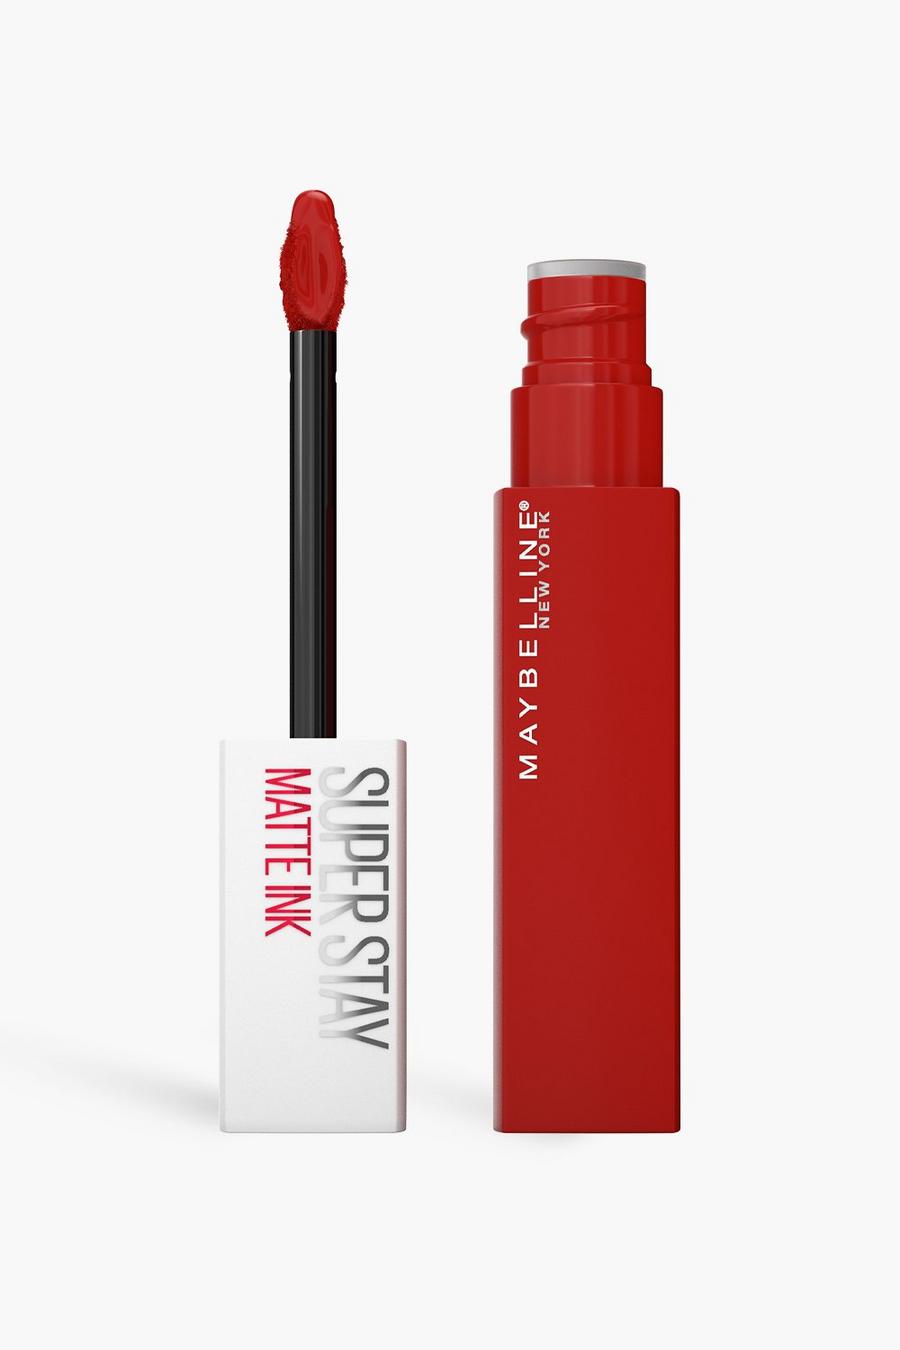 Maybelline - Rouge à lèvres liquide Superstay, Red